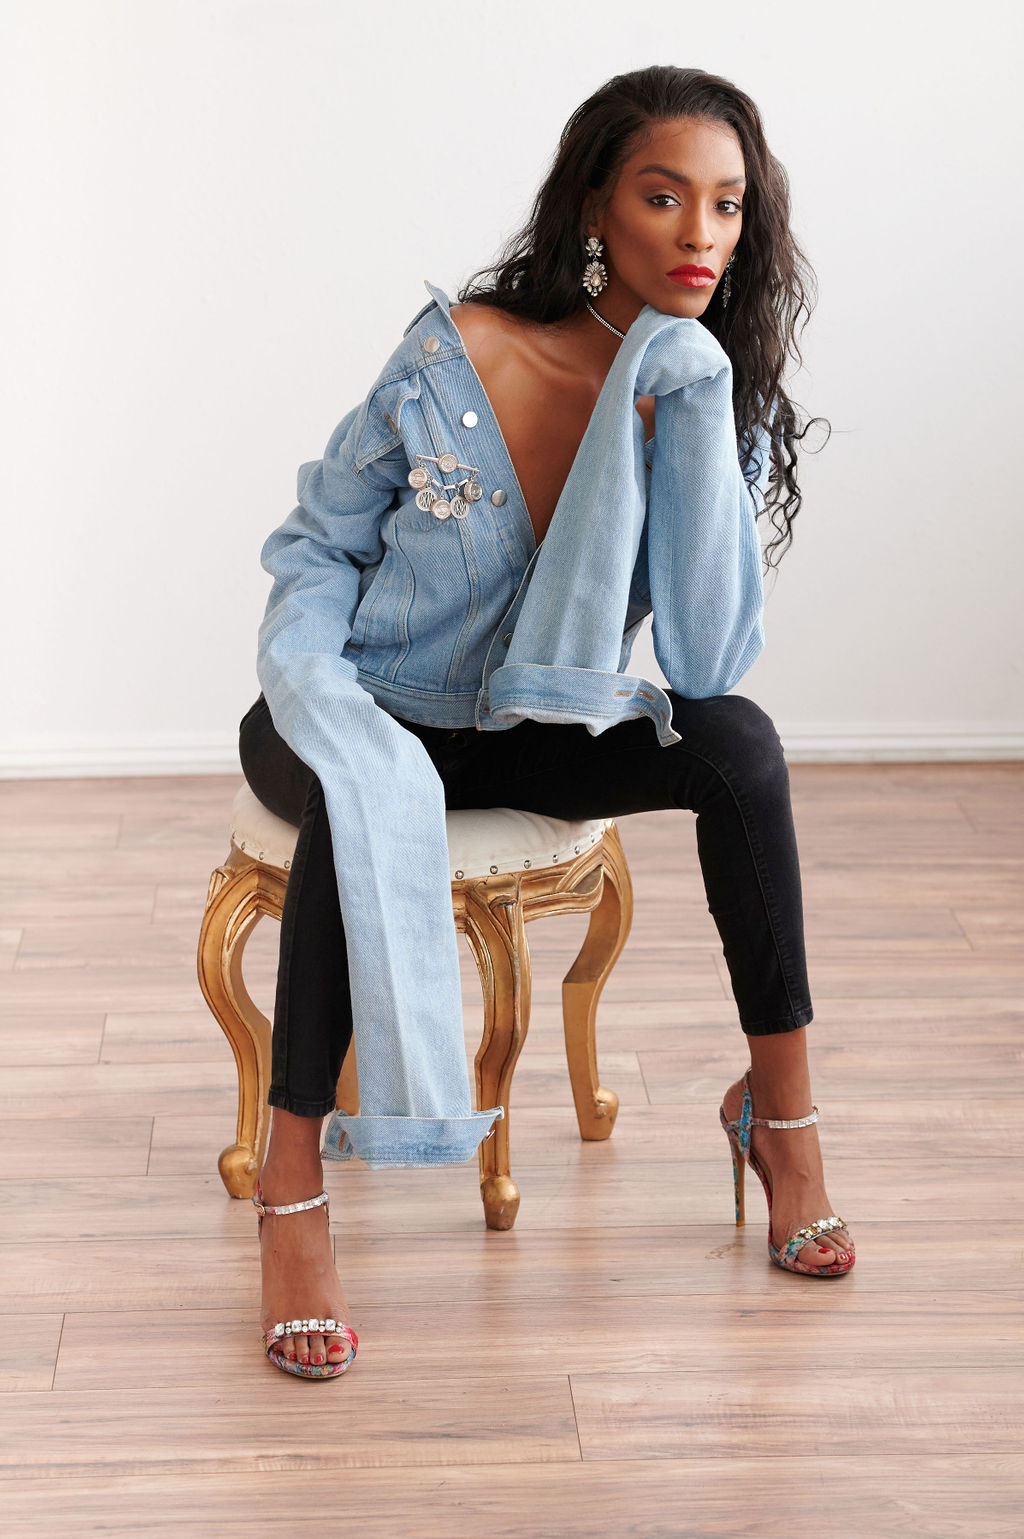 annjulia smalls-y project-sheldon botler photography-styled by melissa-brown skin model-denim-elongated sleeves-fashion